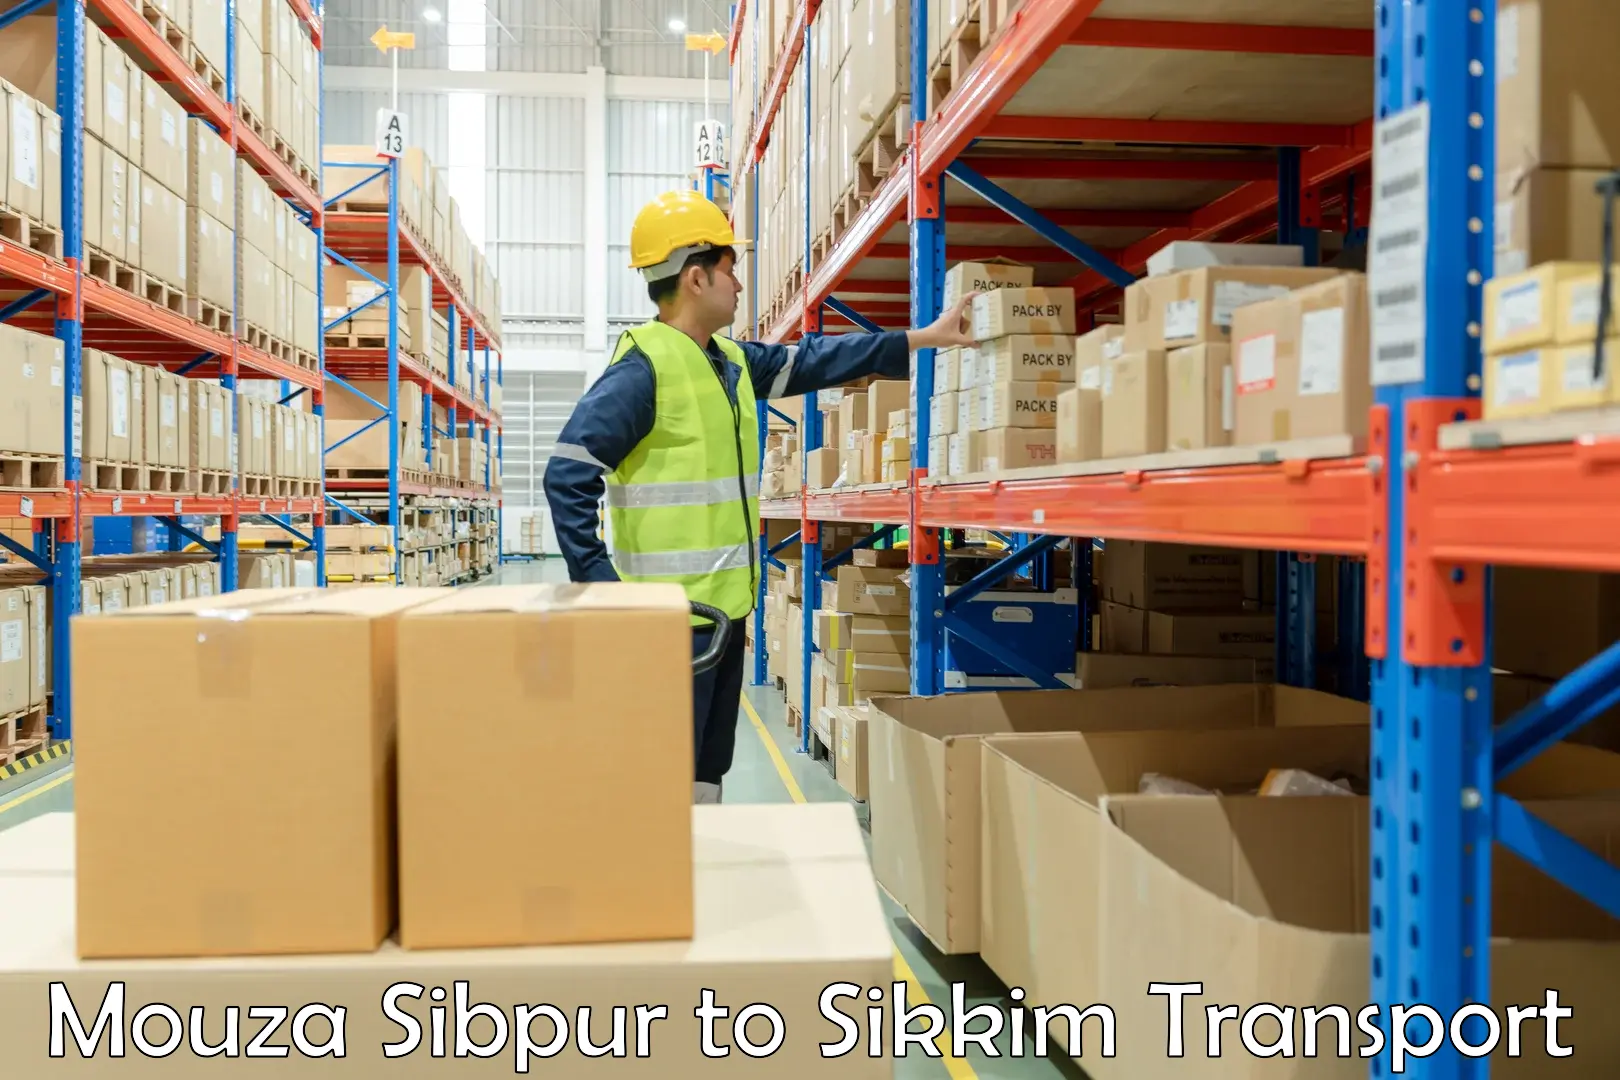 Daily parcel service transport Mouza Sibpur to Sikkim